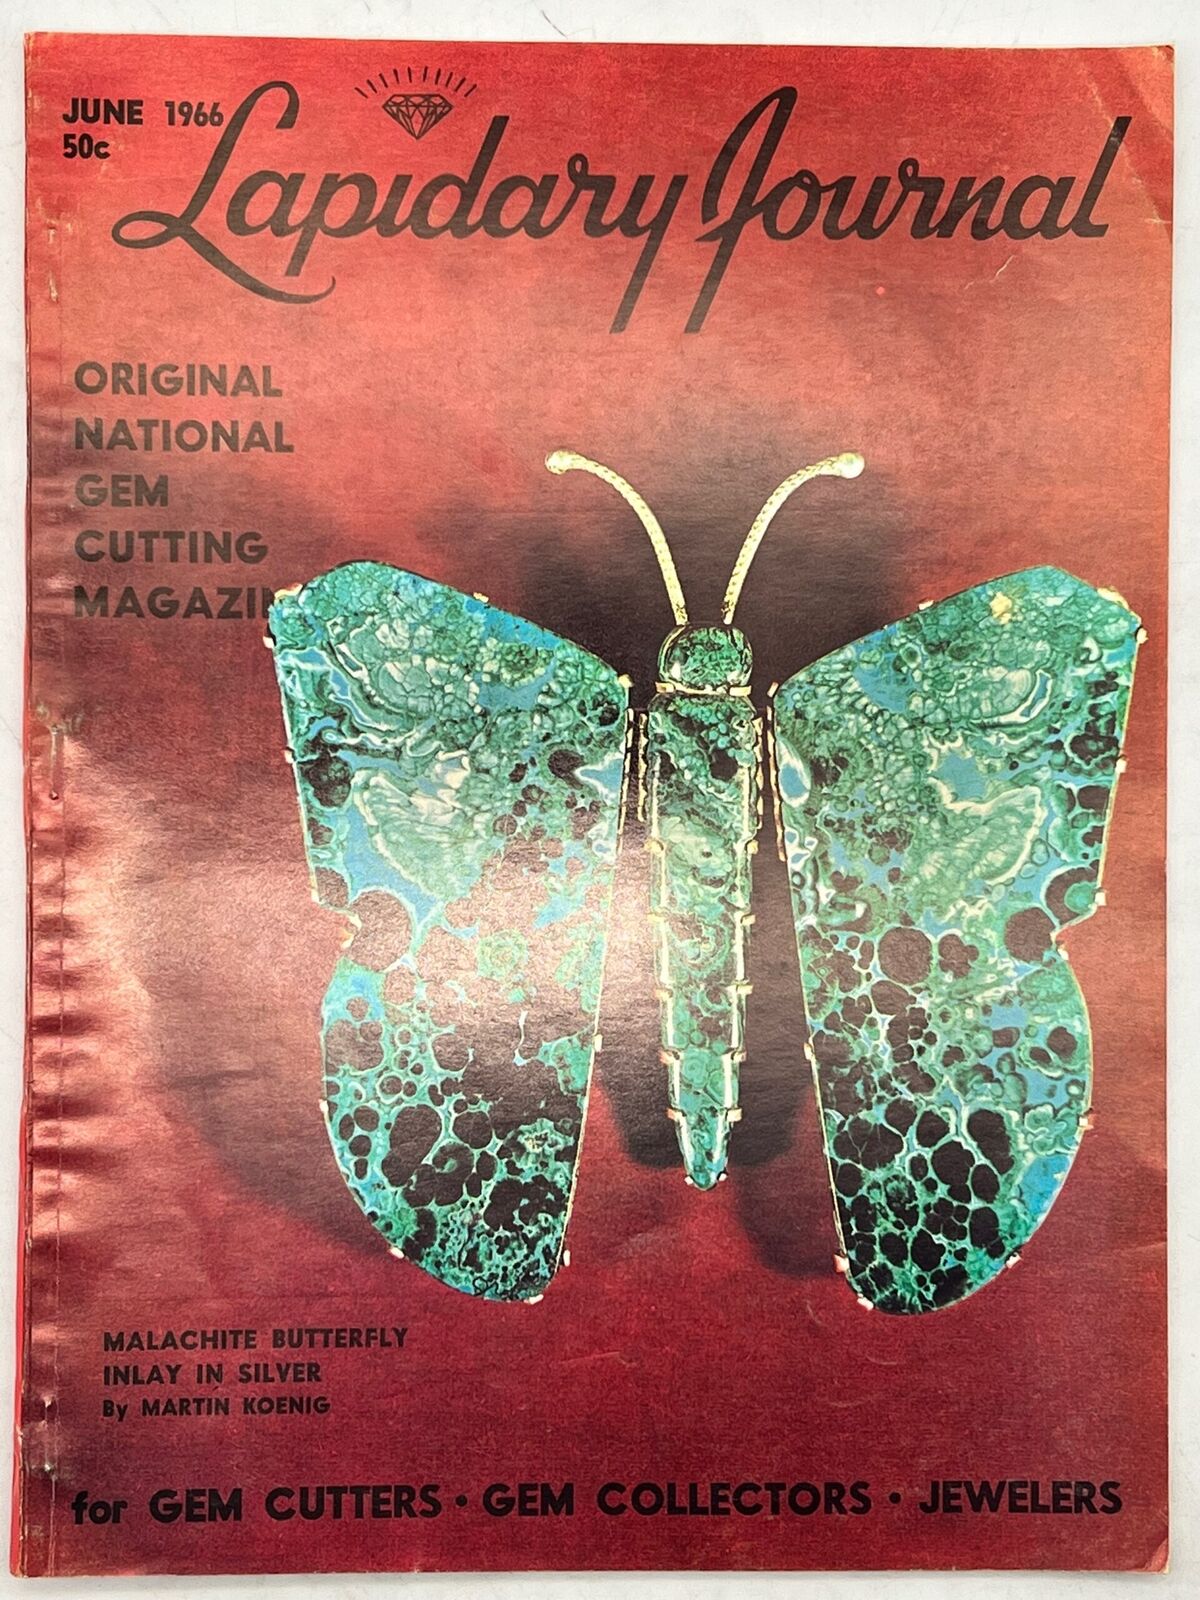 Lapidary Journal Magazine 1966 June Malachite Butterfly Inlay in Silver